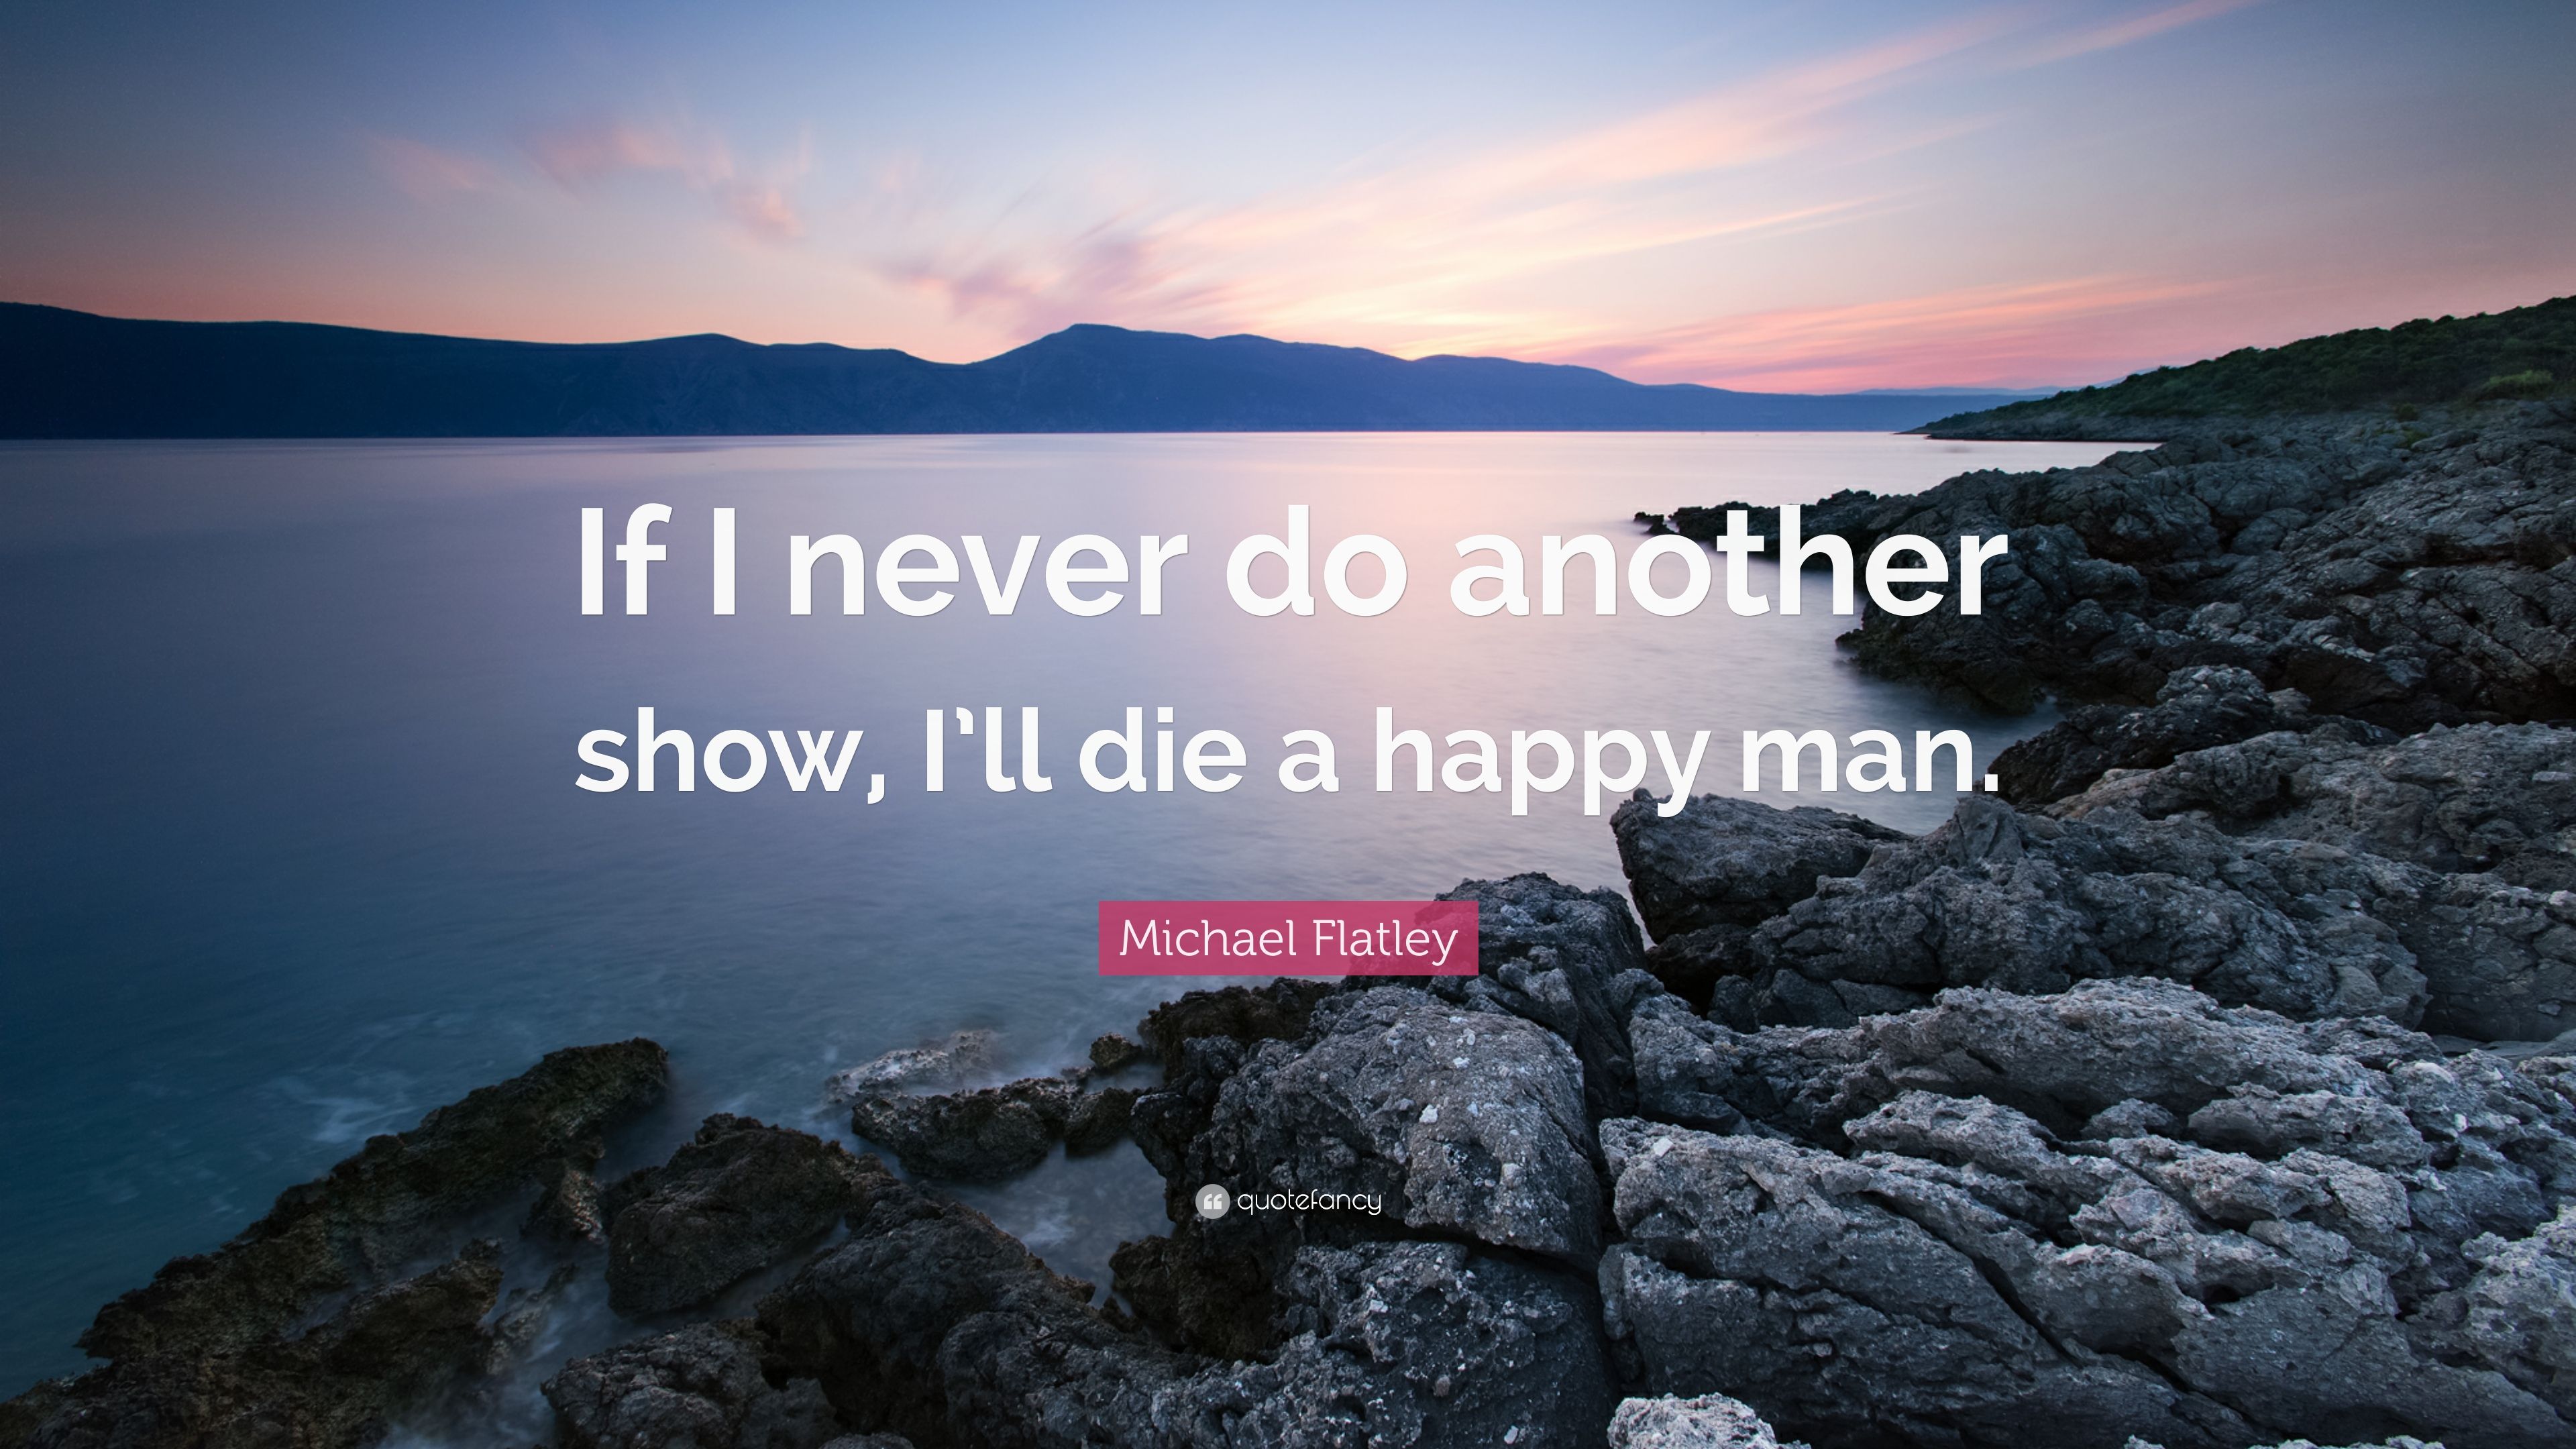 Michael Flatley Quote: “If I never do another show, I'll die a